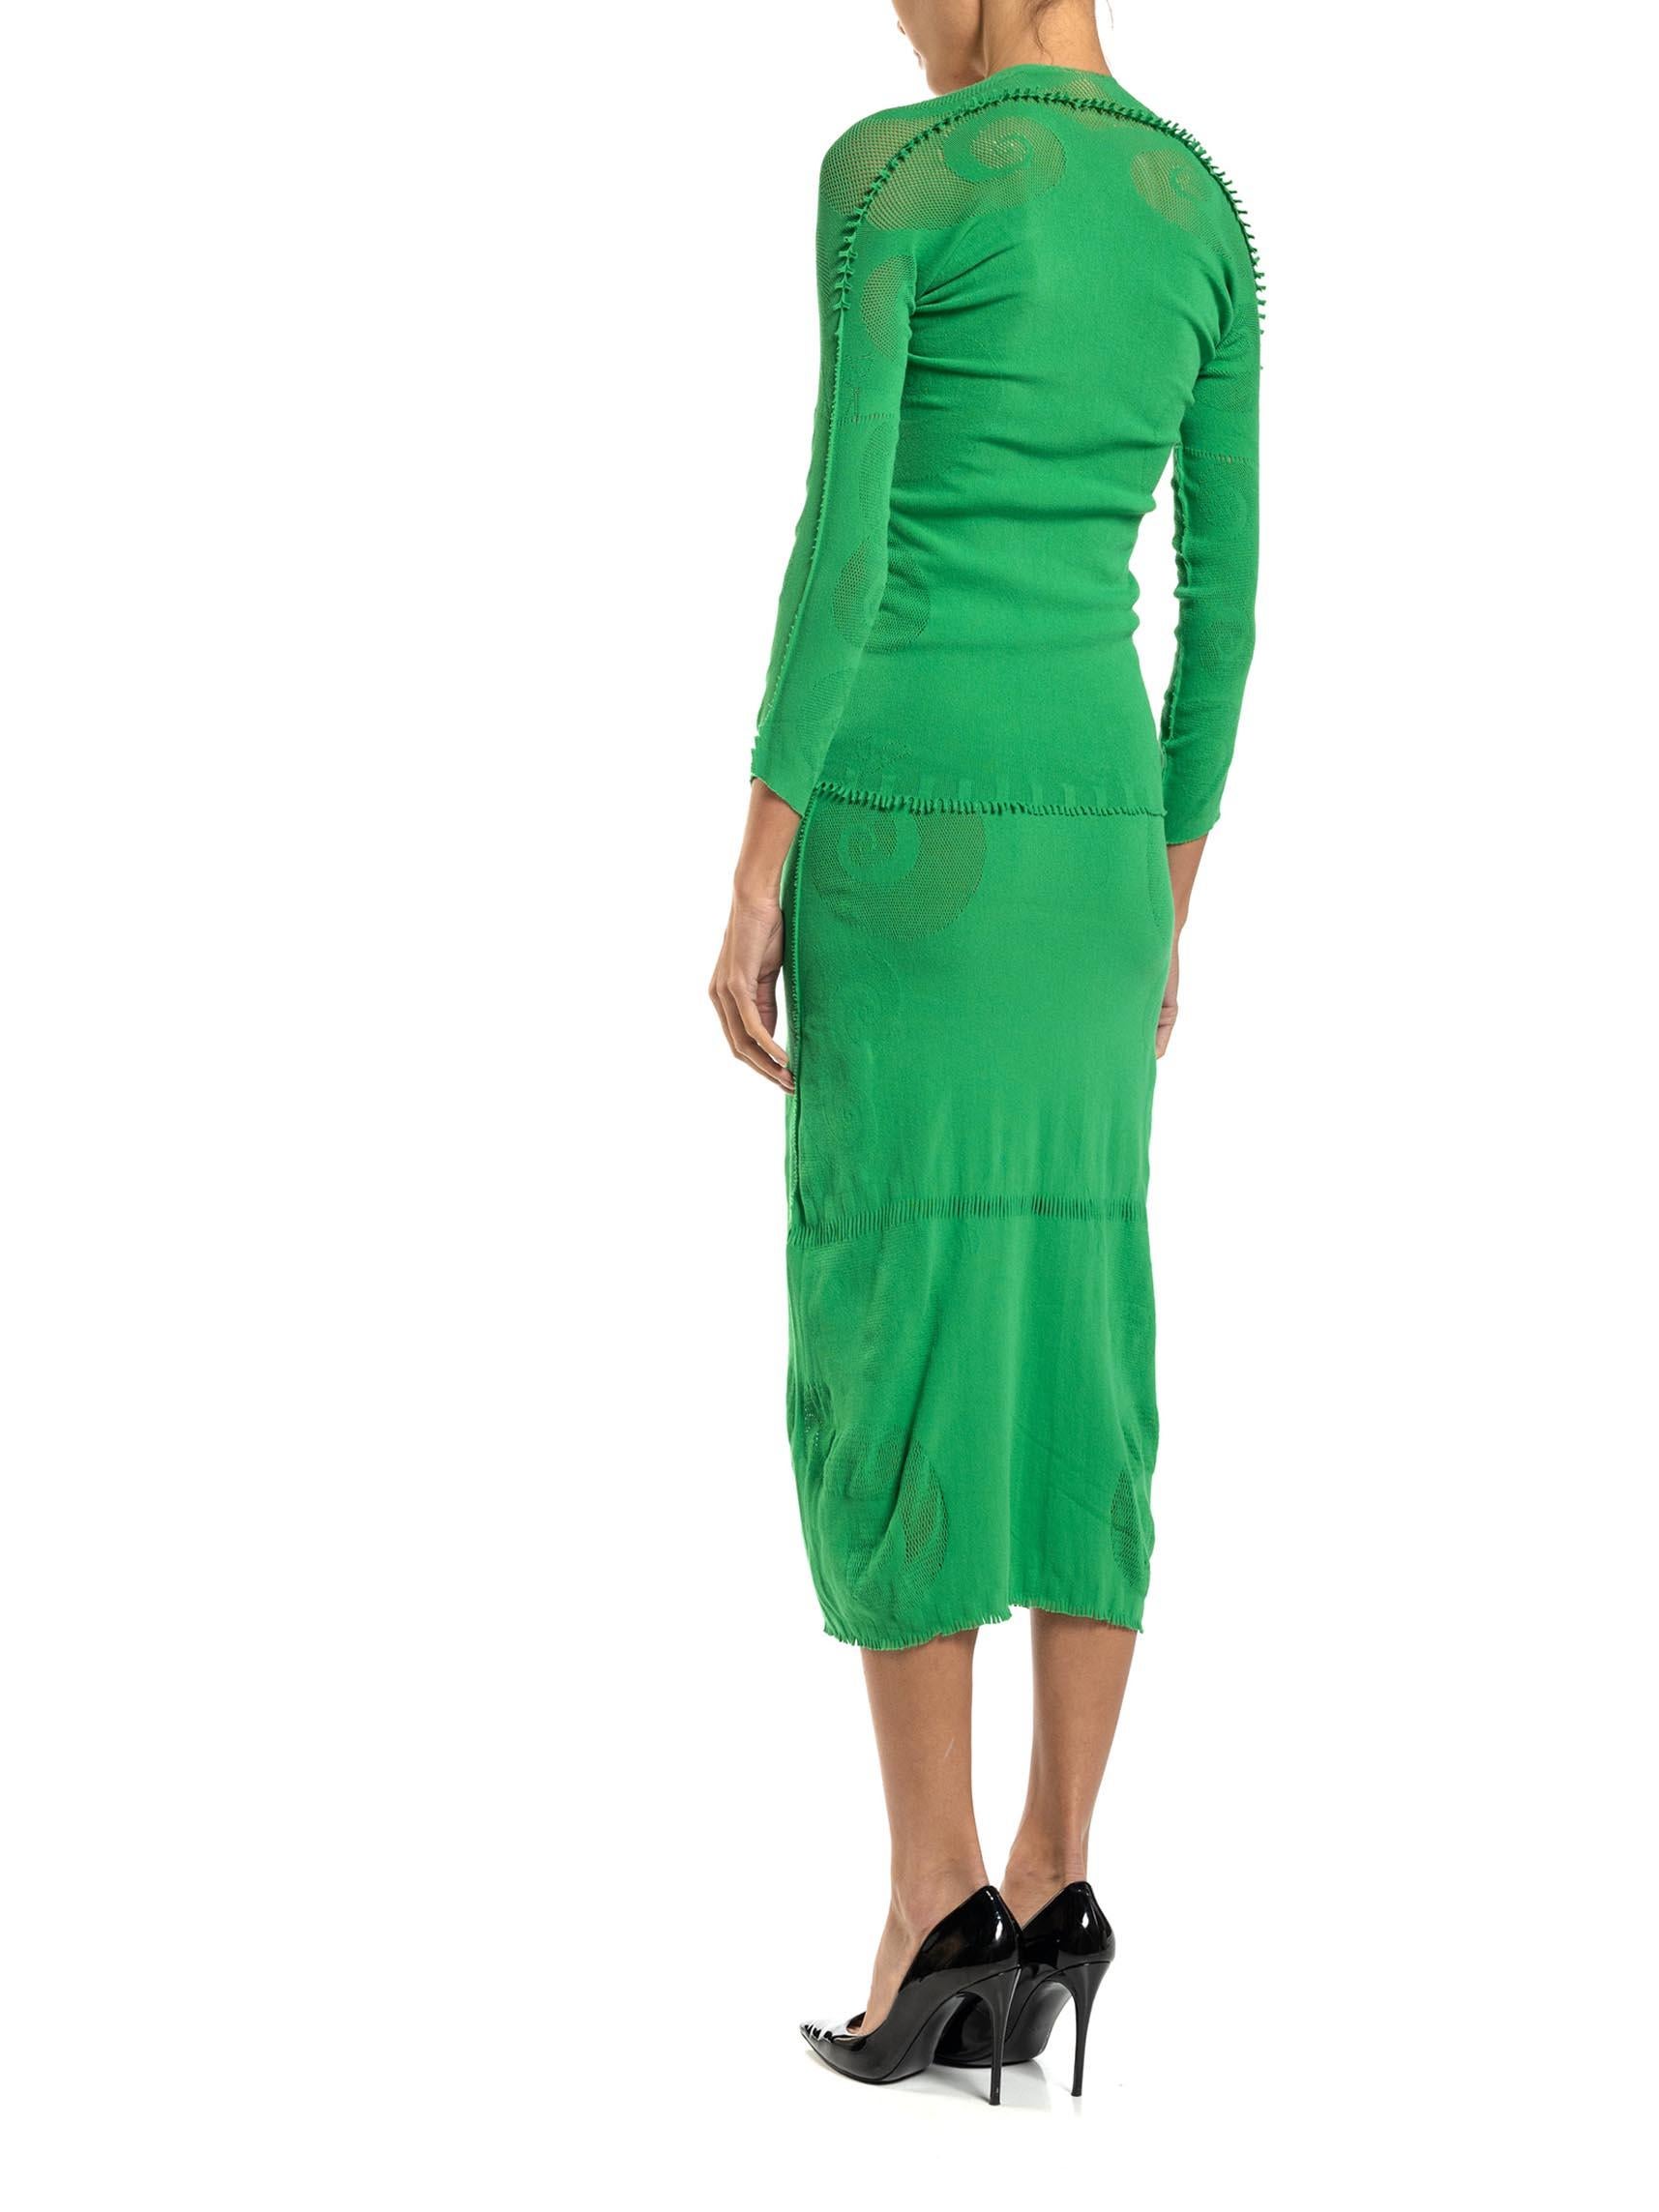 1990S A-POC BY ISSEY MIYAKE Grass Green Poly Blend Knit Top & Skirt Ensemble For Sale 5